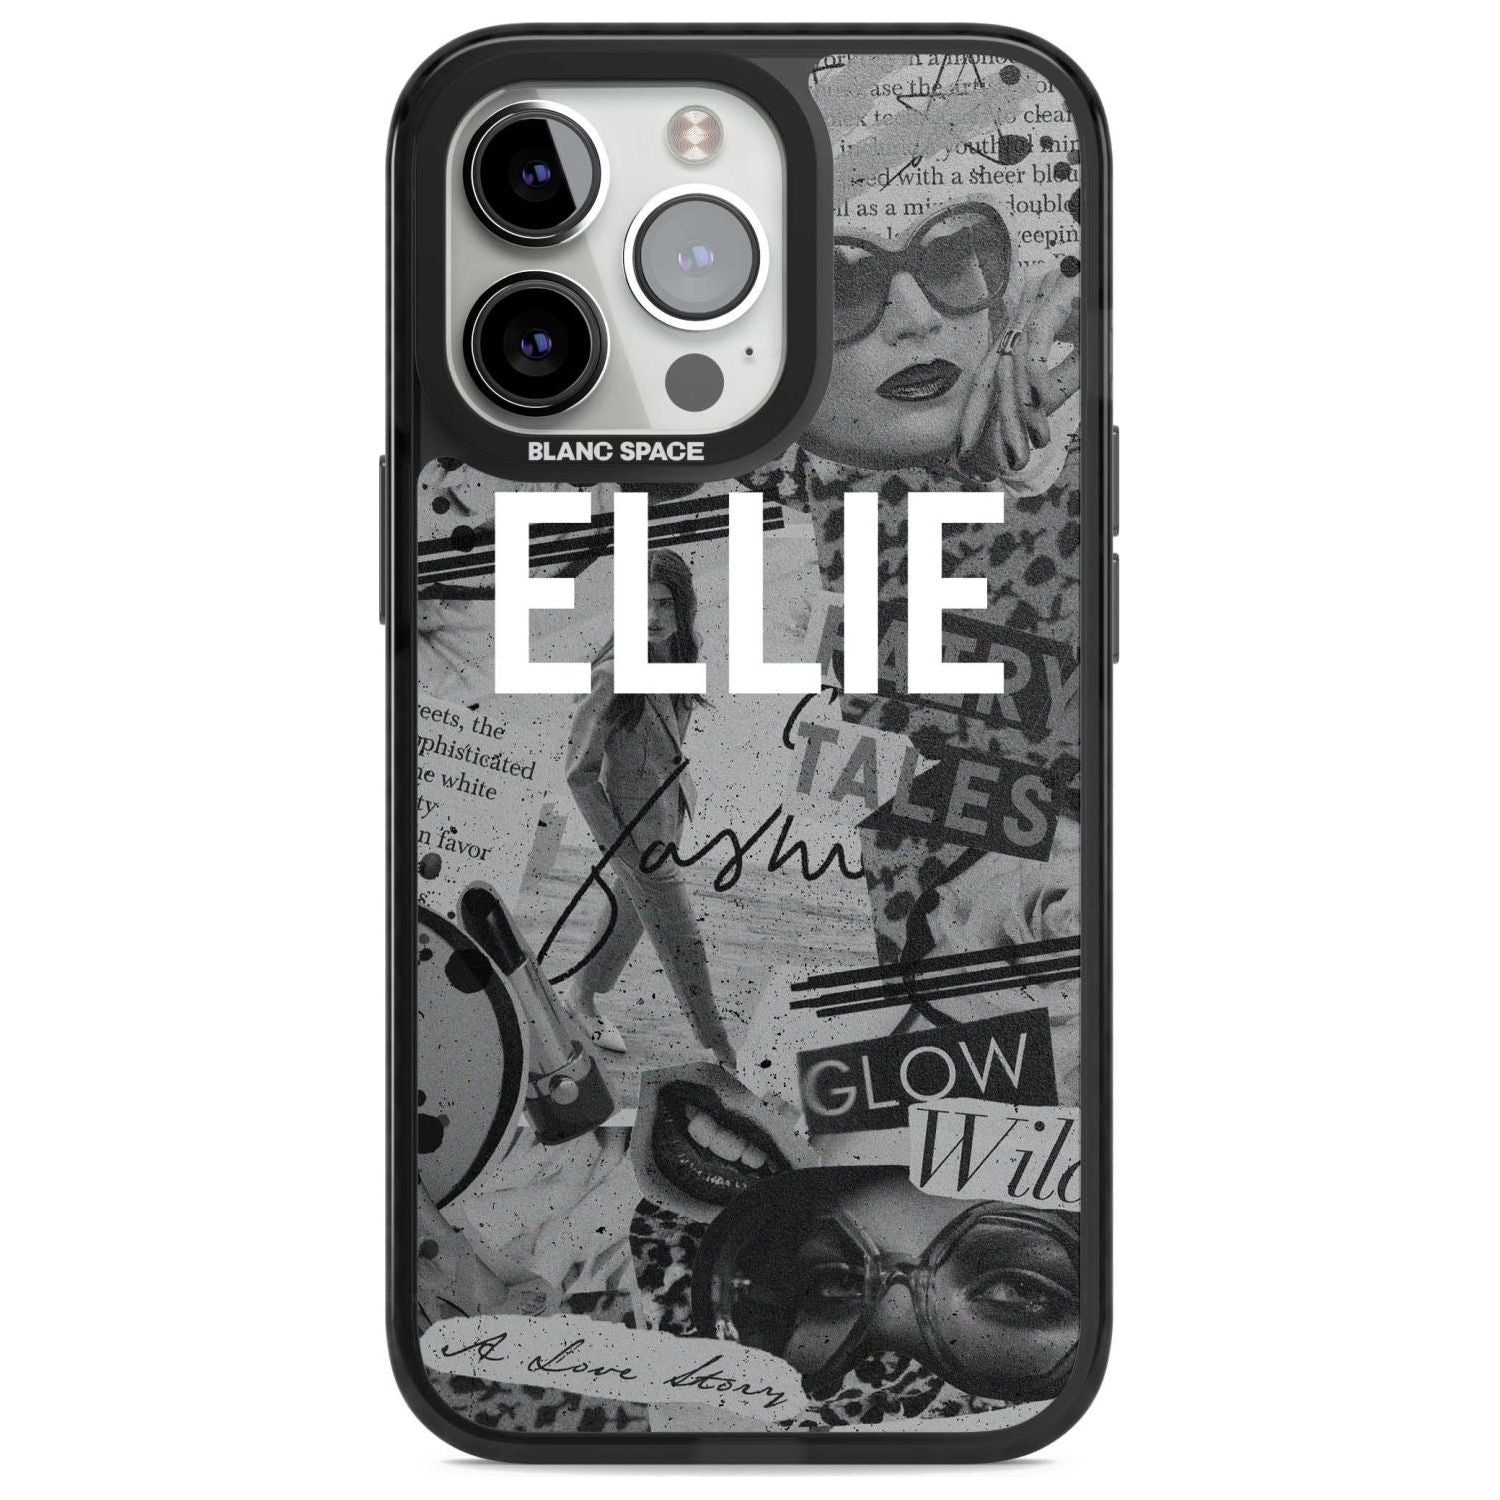 Personalised Grey Scale Fashion Collage Custom Phone Case iPhone 15 Pro Max / Magsafe Black Impact Case,iPhone 15 Pro / Magsafe Black Impact Case,iPhone 14 Pro Max / Magsafe Black Impact Case,iPhone 14 Pro / Magsafe Black Impact Case,iPhone 13 Pro / Magsafe Black Impact Case Blanc Space